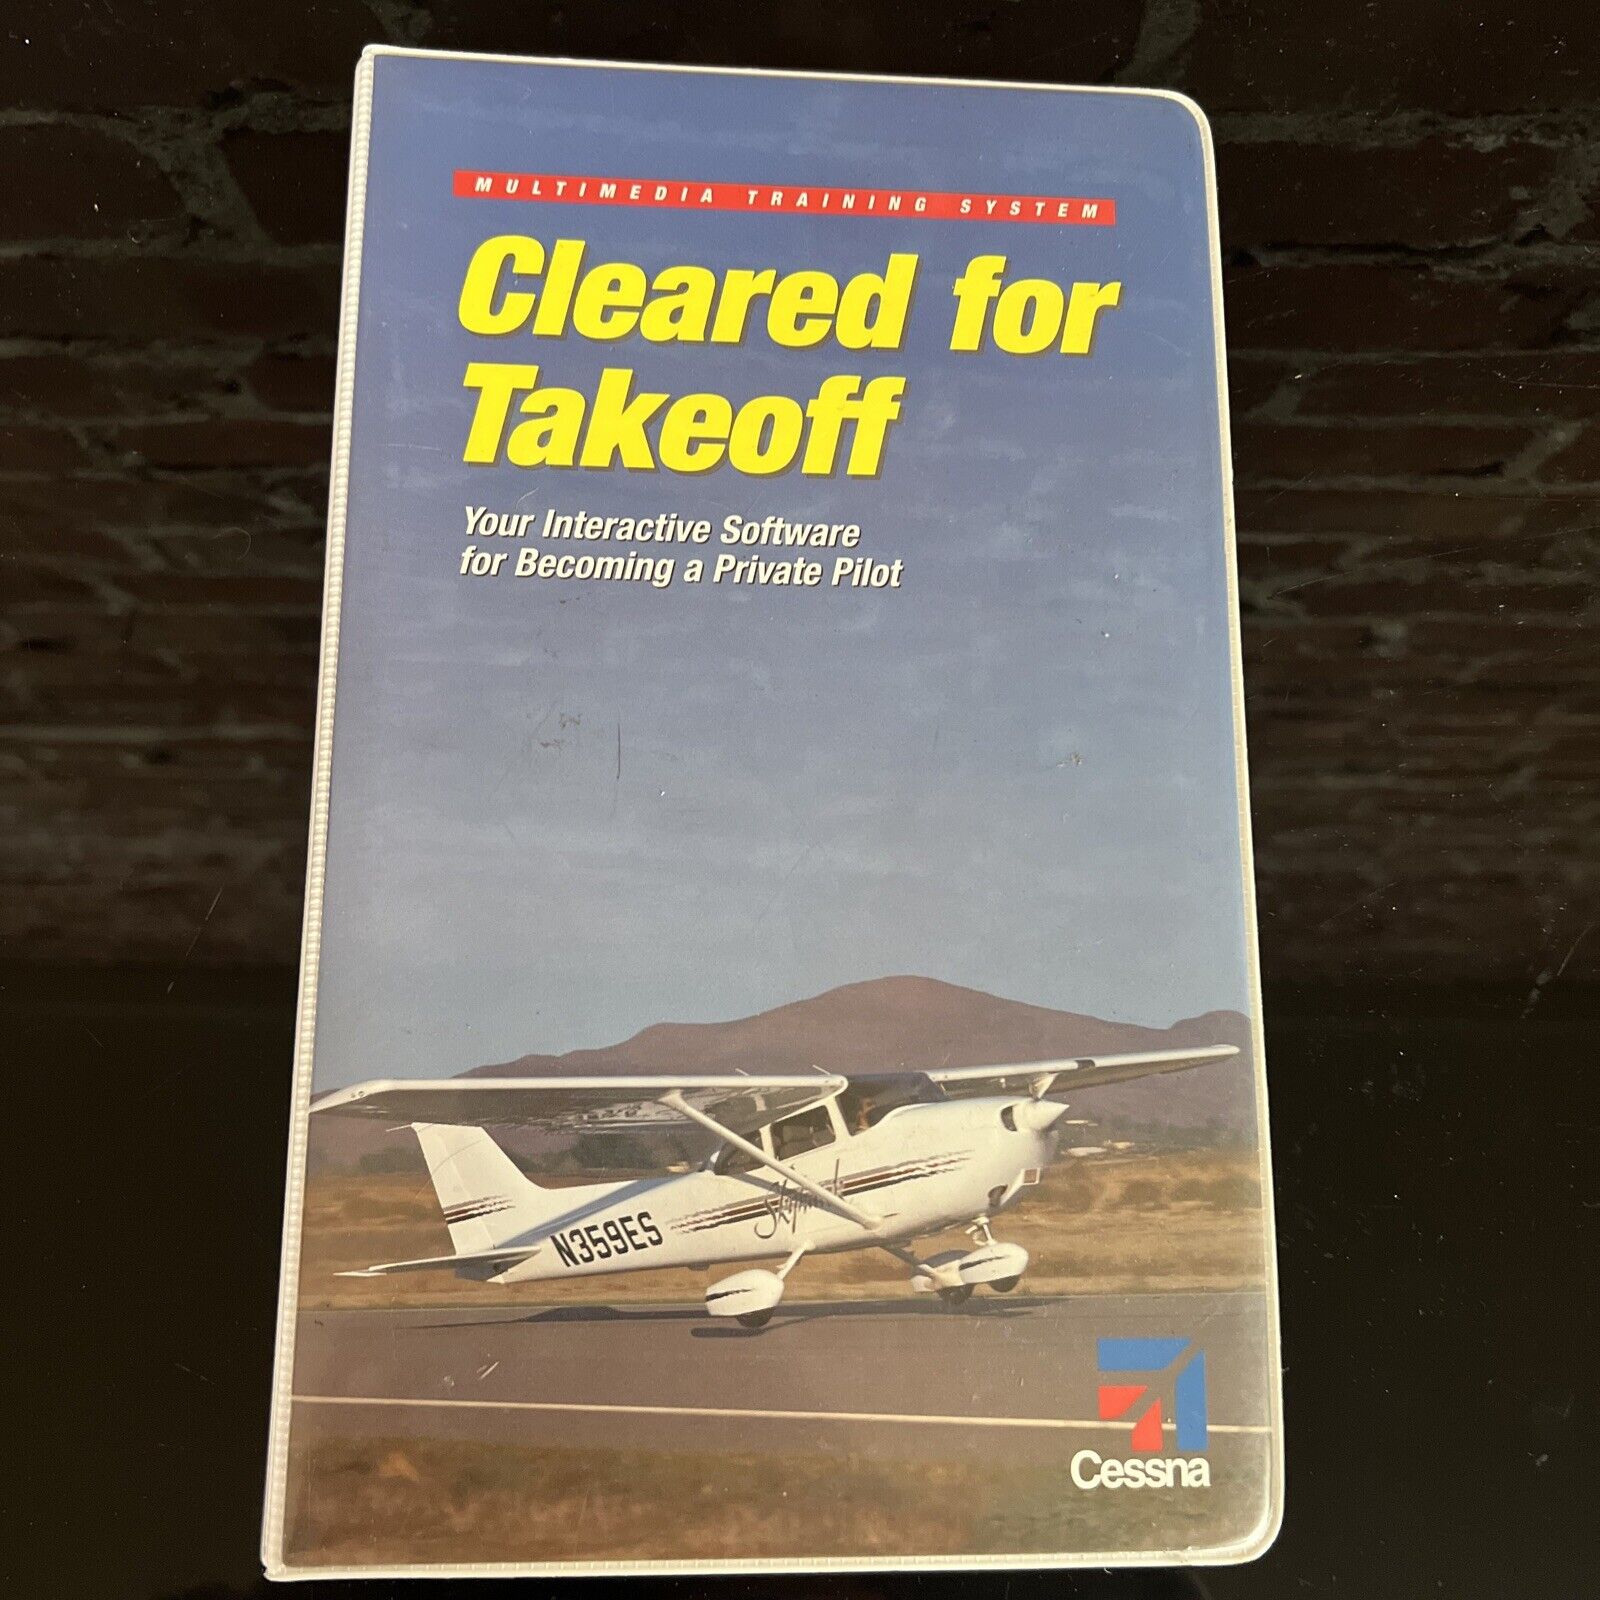 Cleared For Takeoff Cessna Pilot Center Complete King Schools Training Program